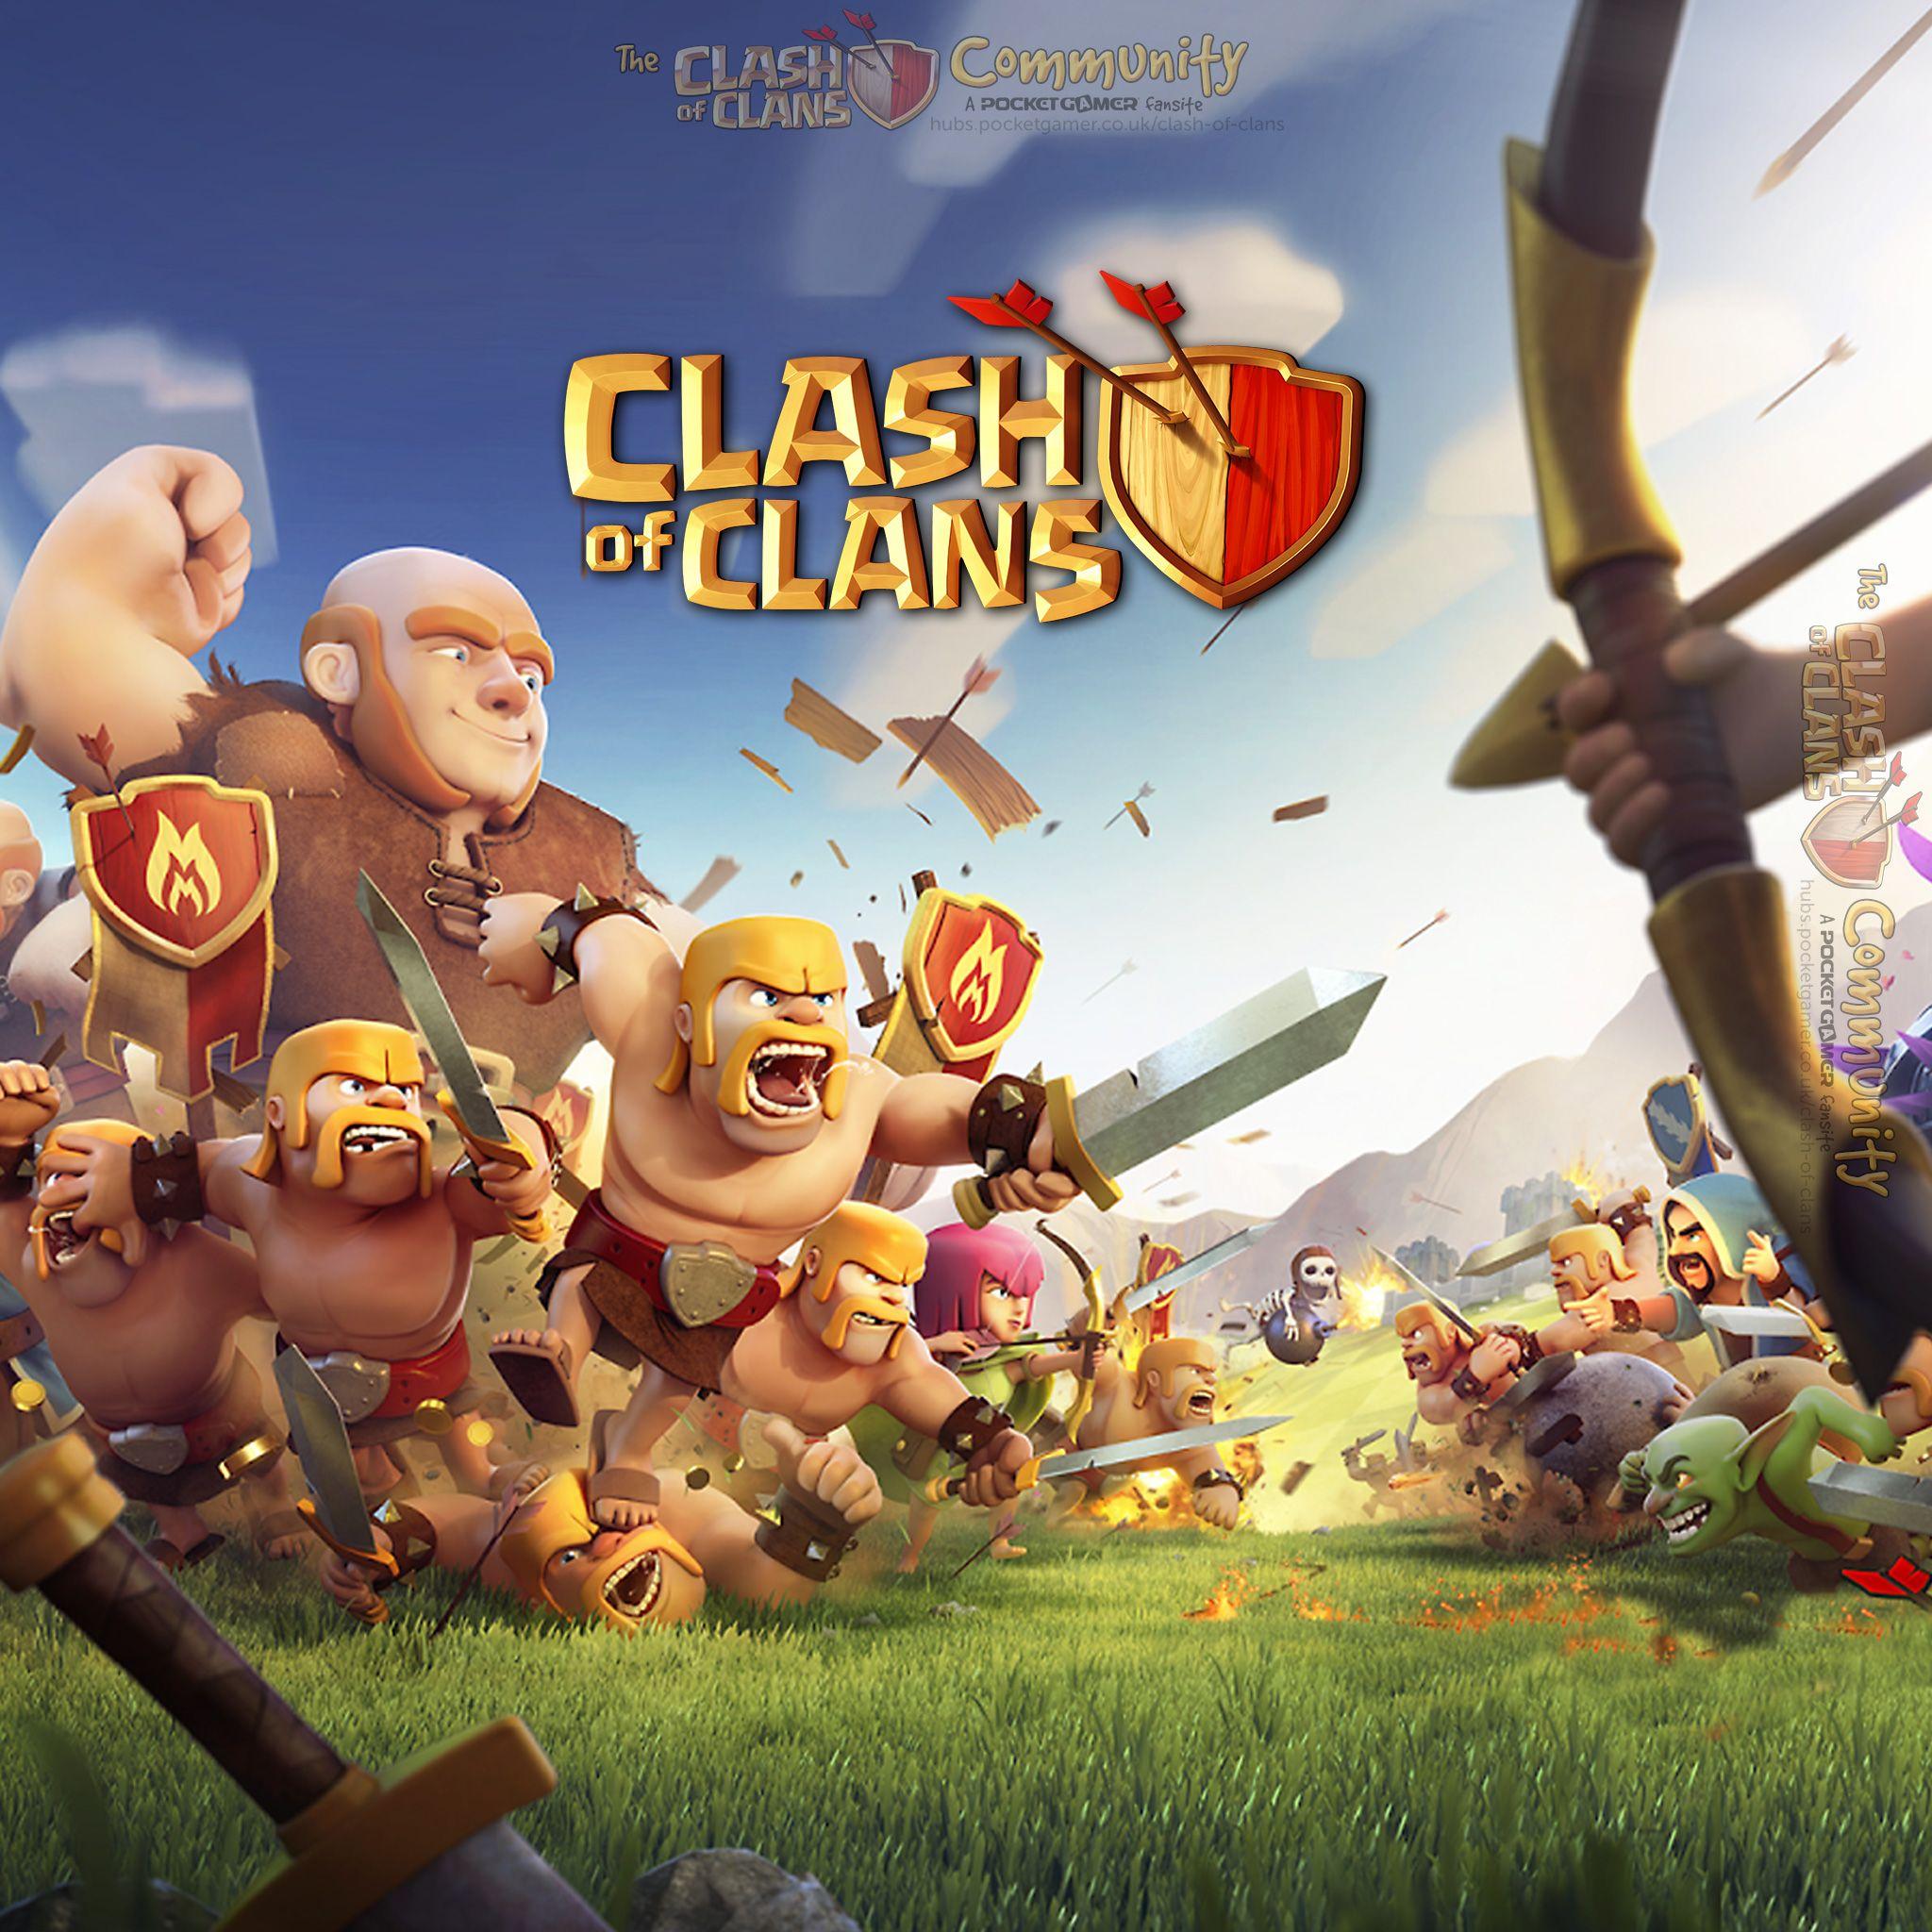 Clash of Clans Online Generator is perfect to use if you need more